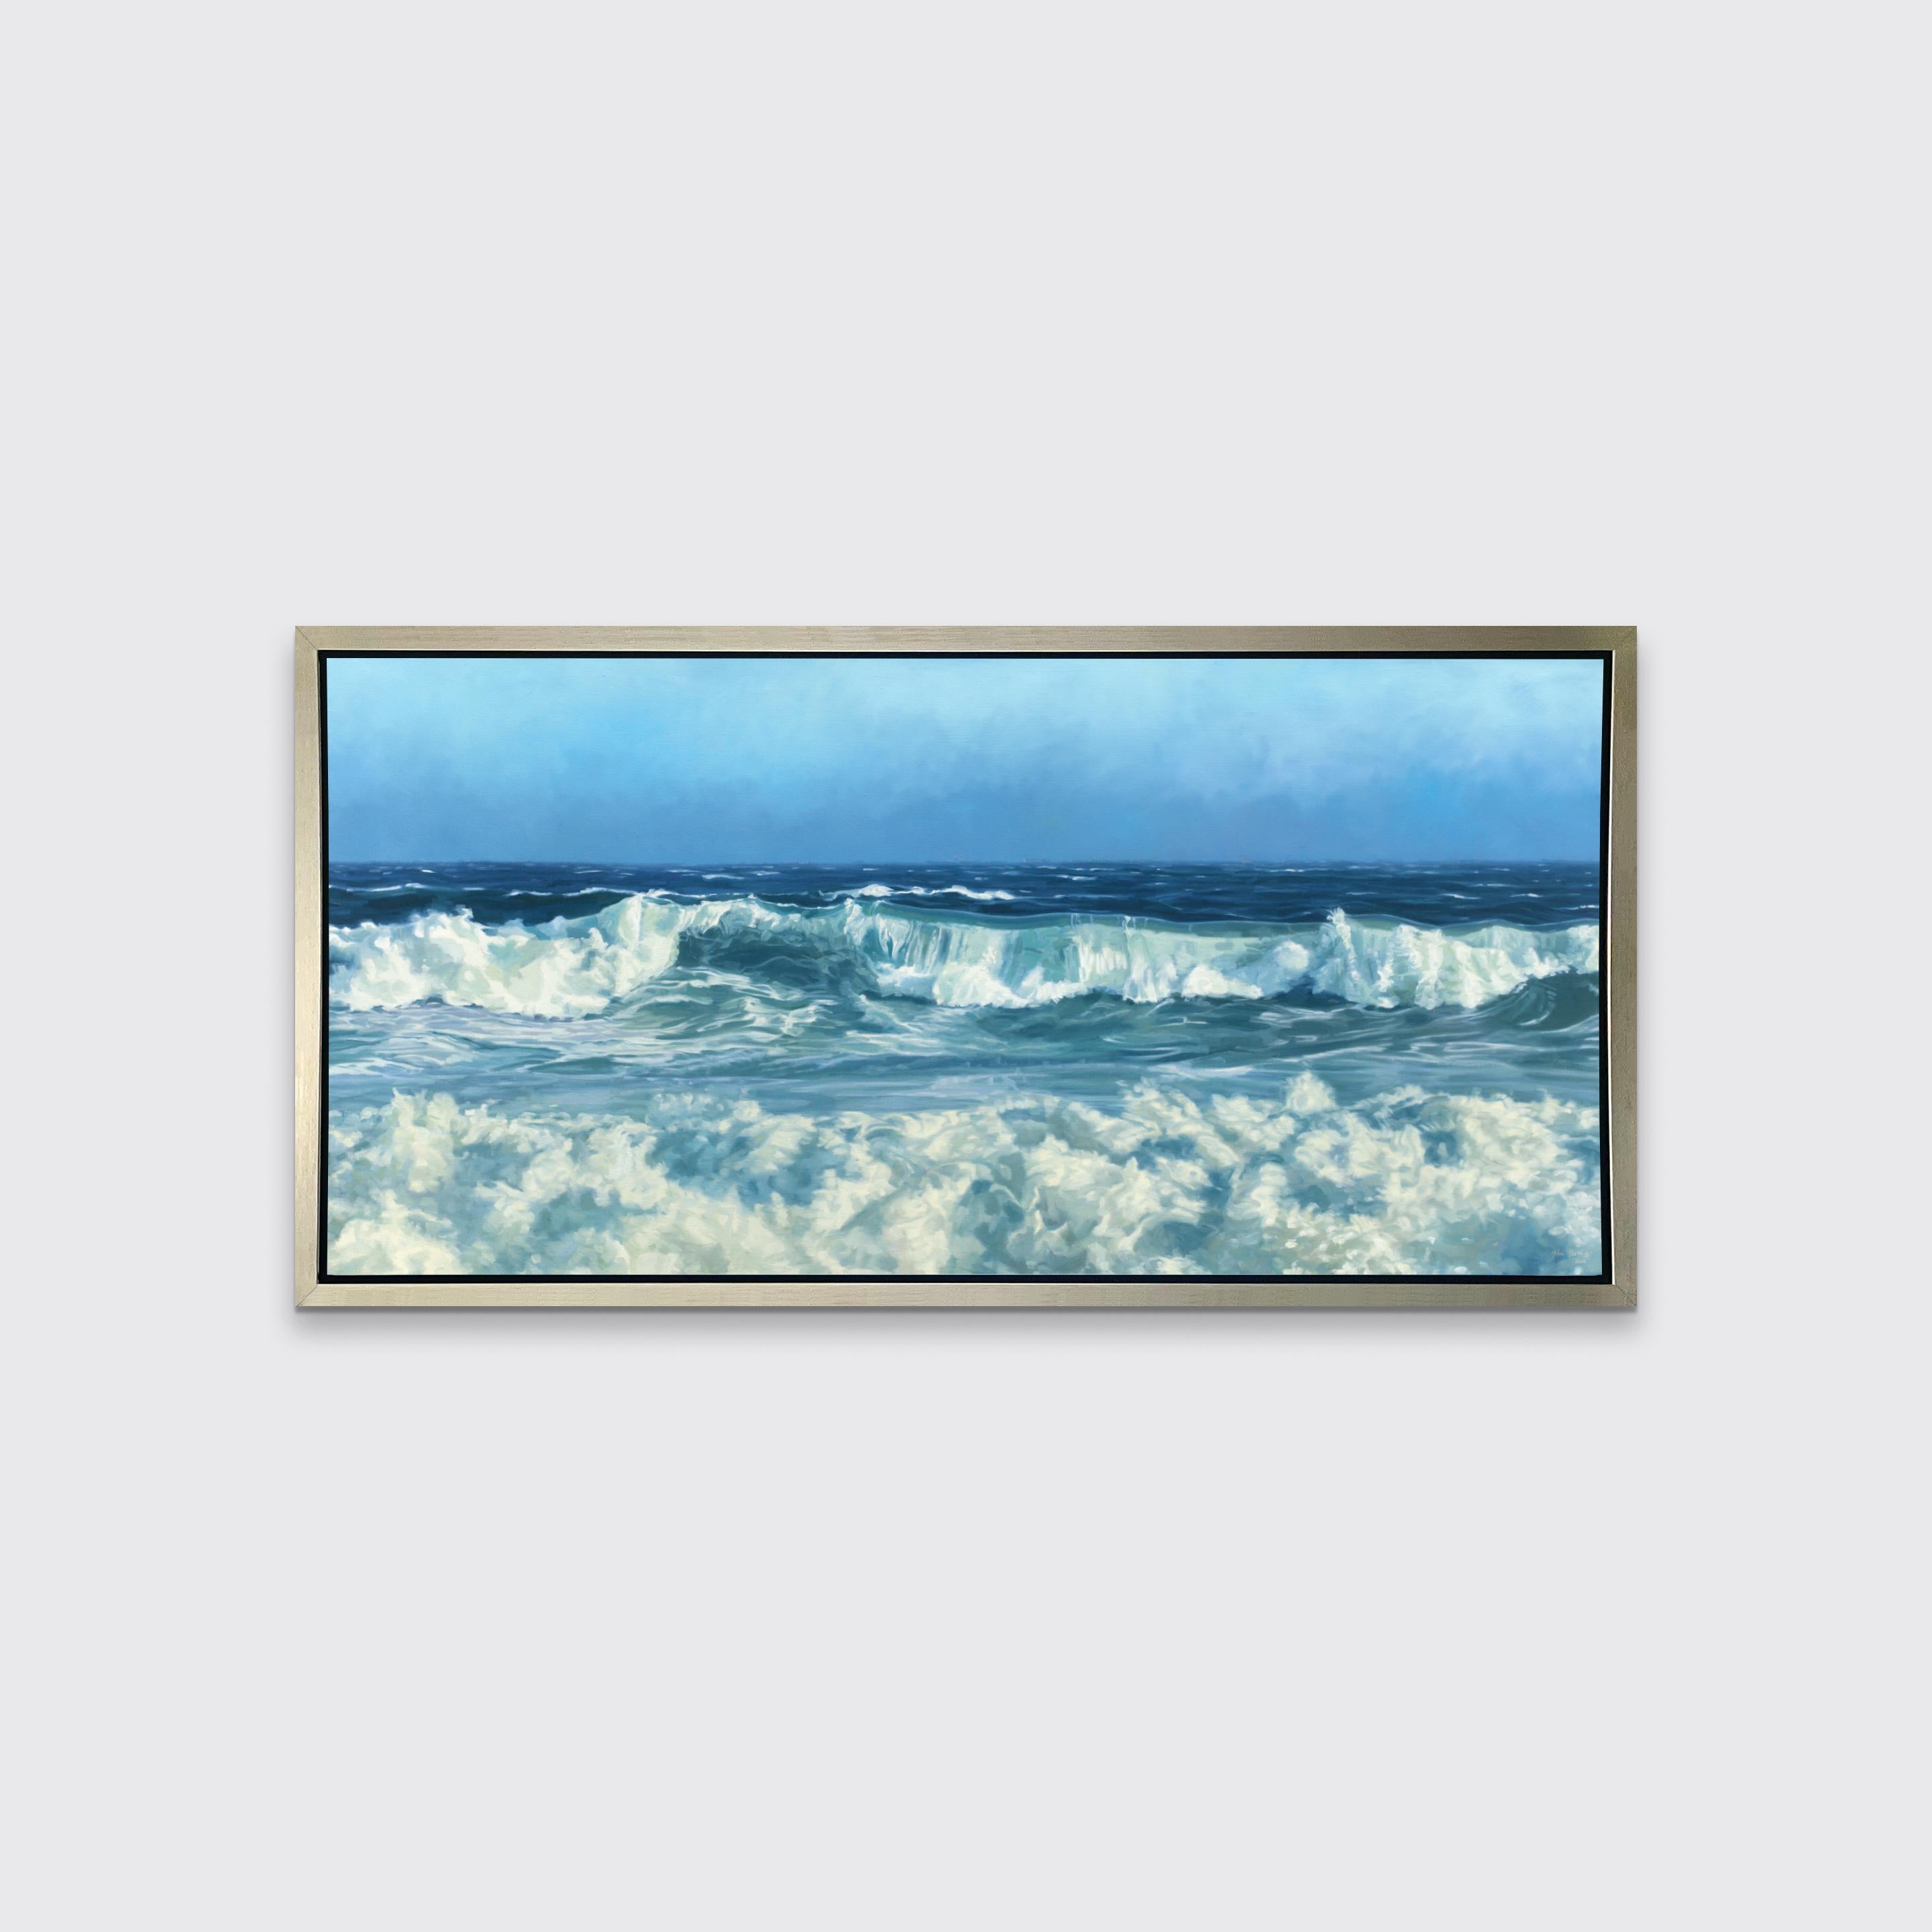 This coastal seascape limited edition print captures a cropped view of rolling waves below an ocean horizon line and a clear blue sky. Highly detailed and realistic, it balances the deep blues of the ocean with white foam and mist created by lightly